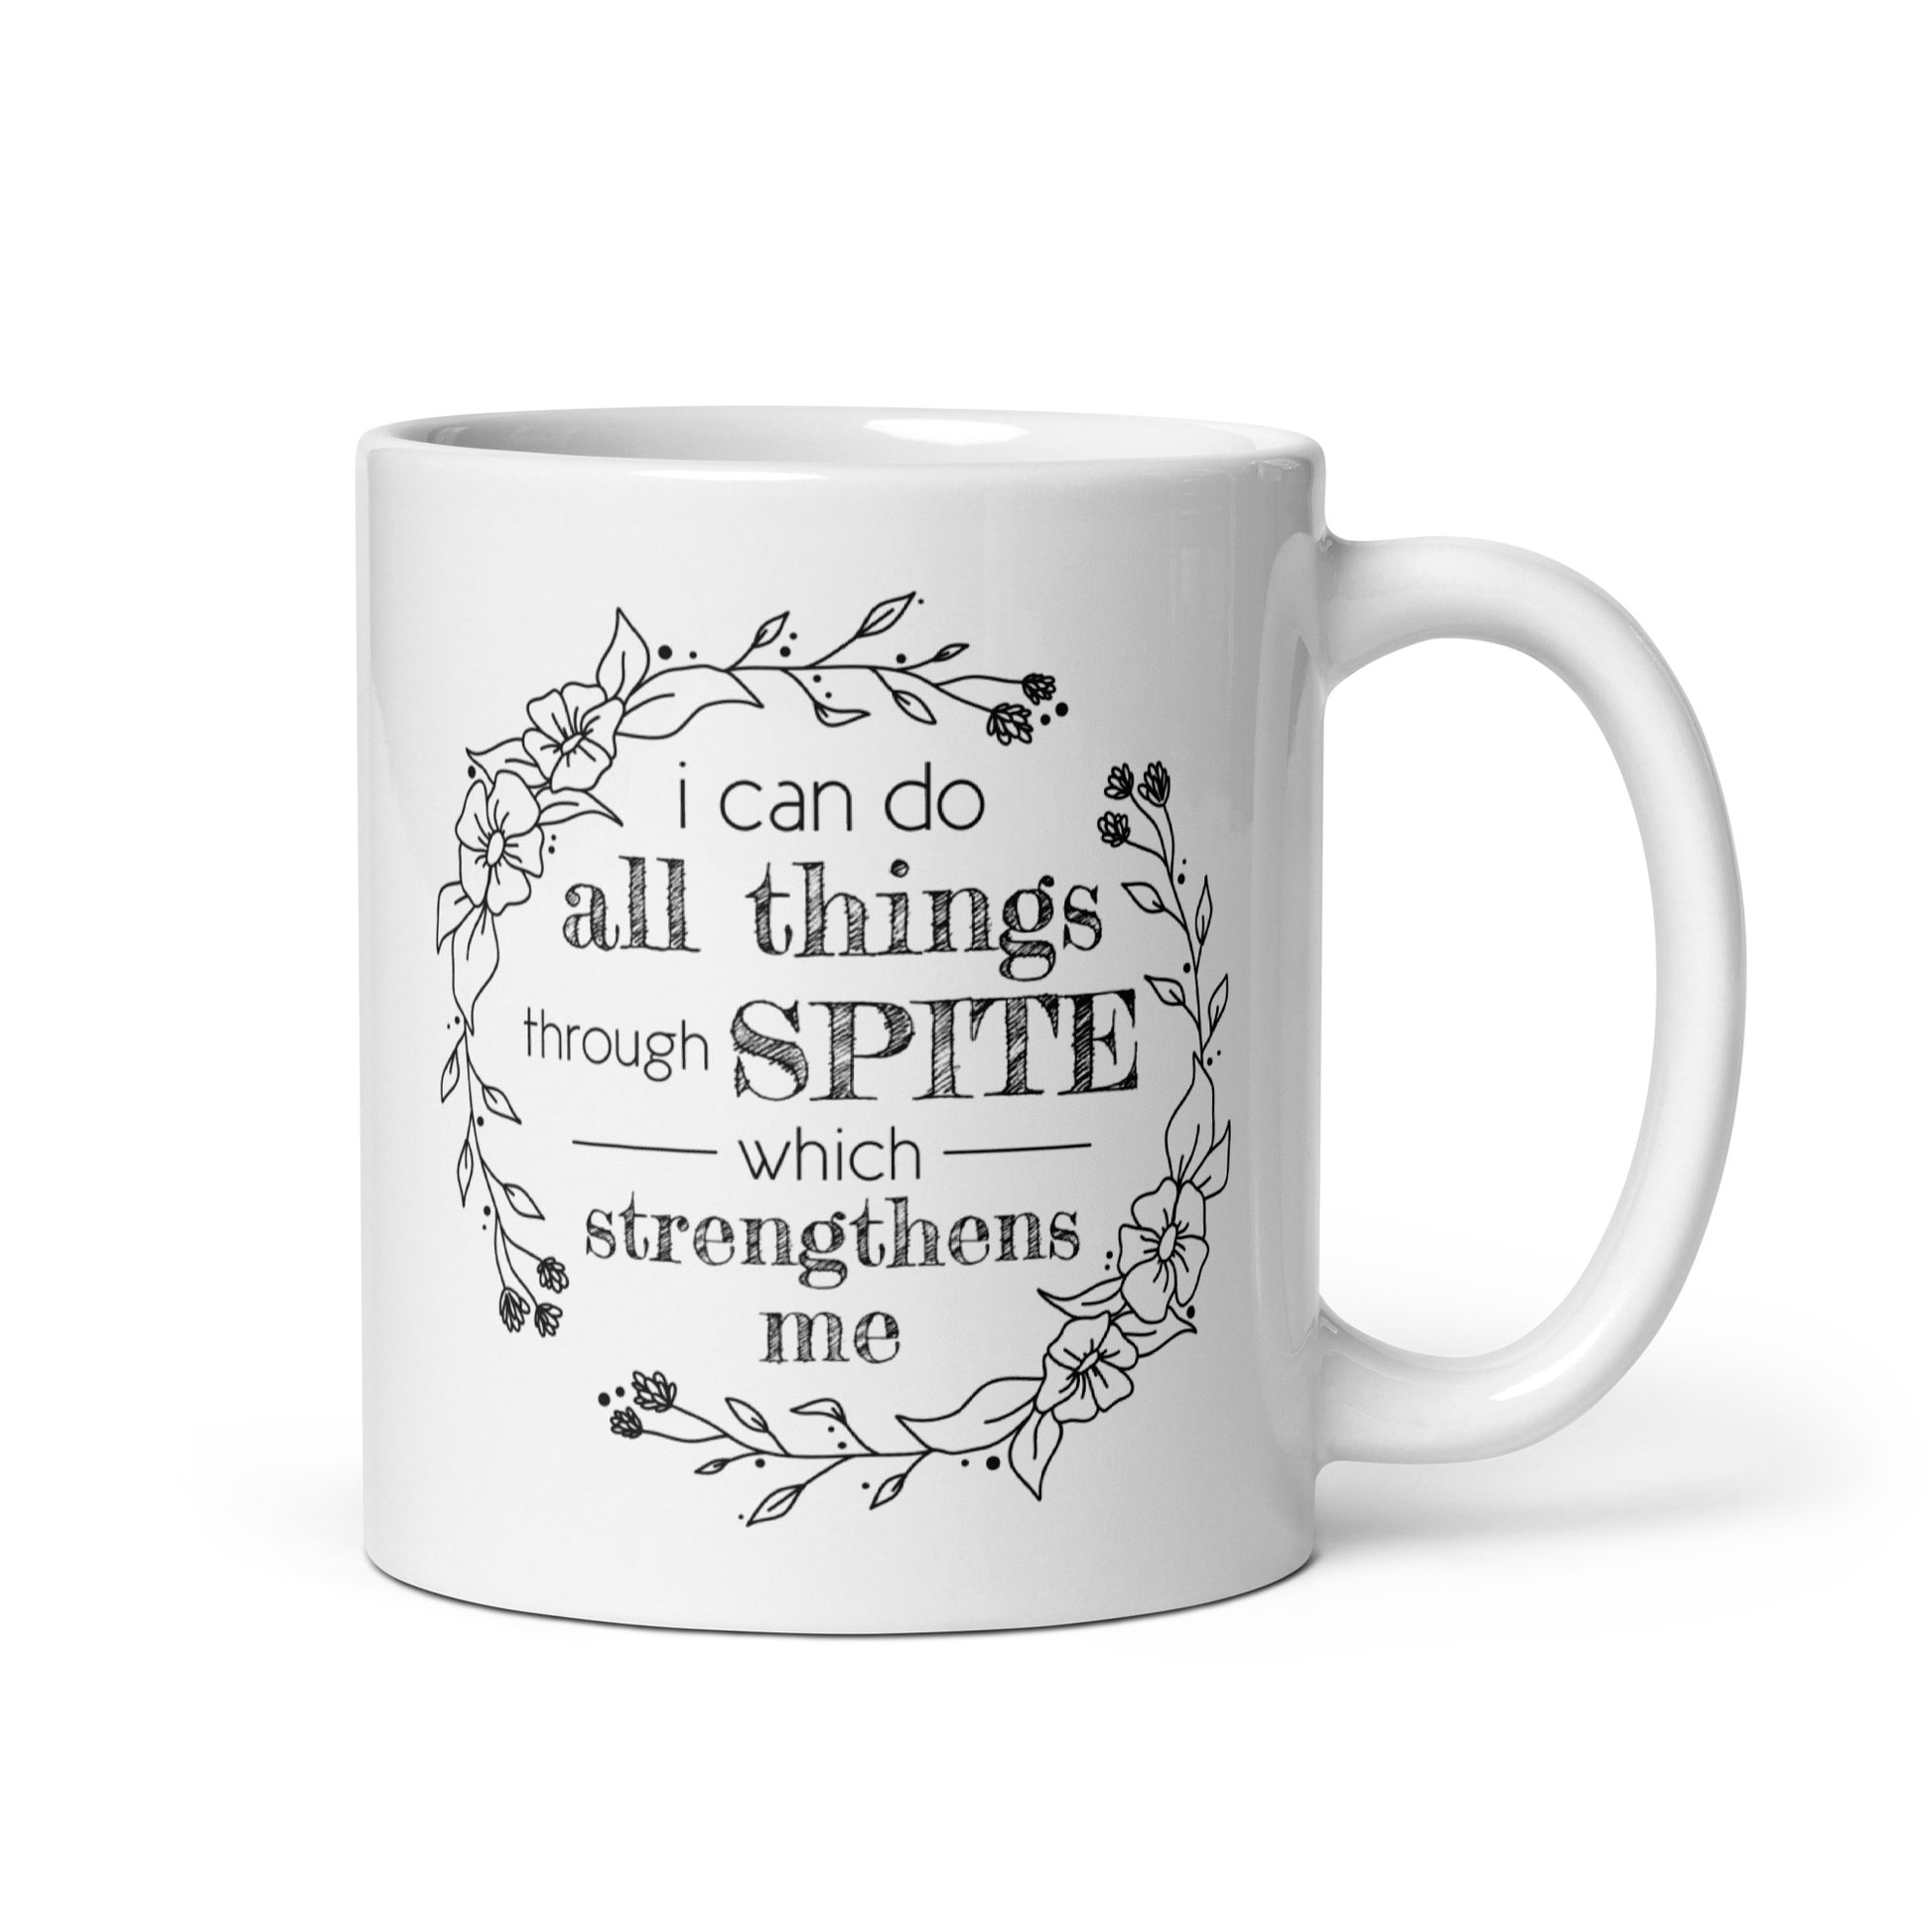 A white ceramic mug featuring a simple illustration of a floral wreath. Inside the wreath is text that reads "I can do all things through SPITE which motivates me"